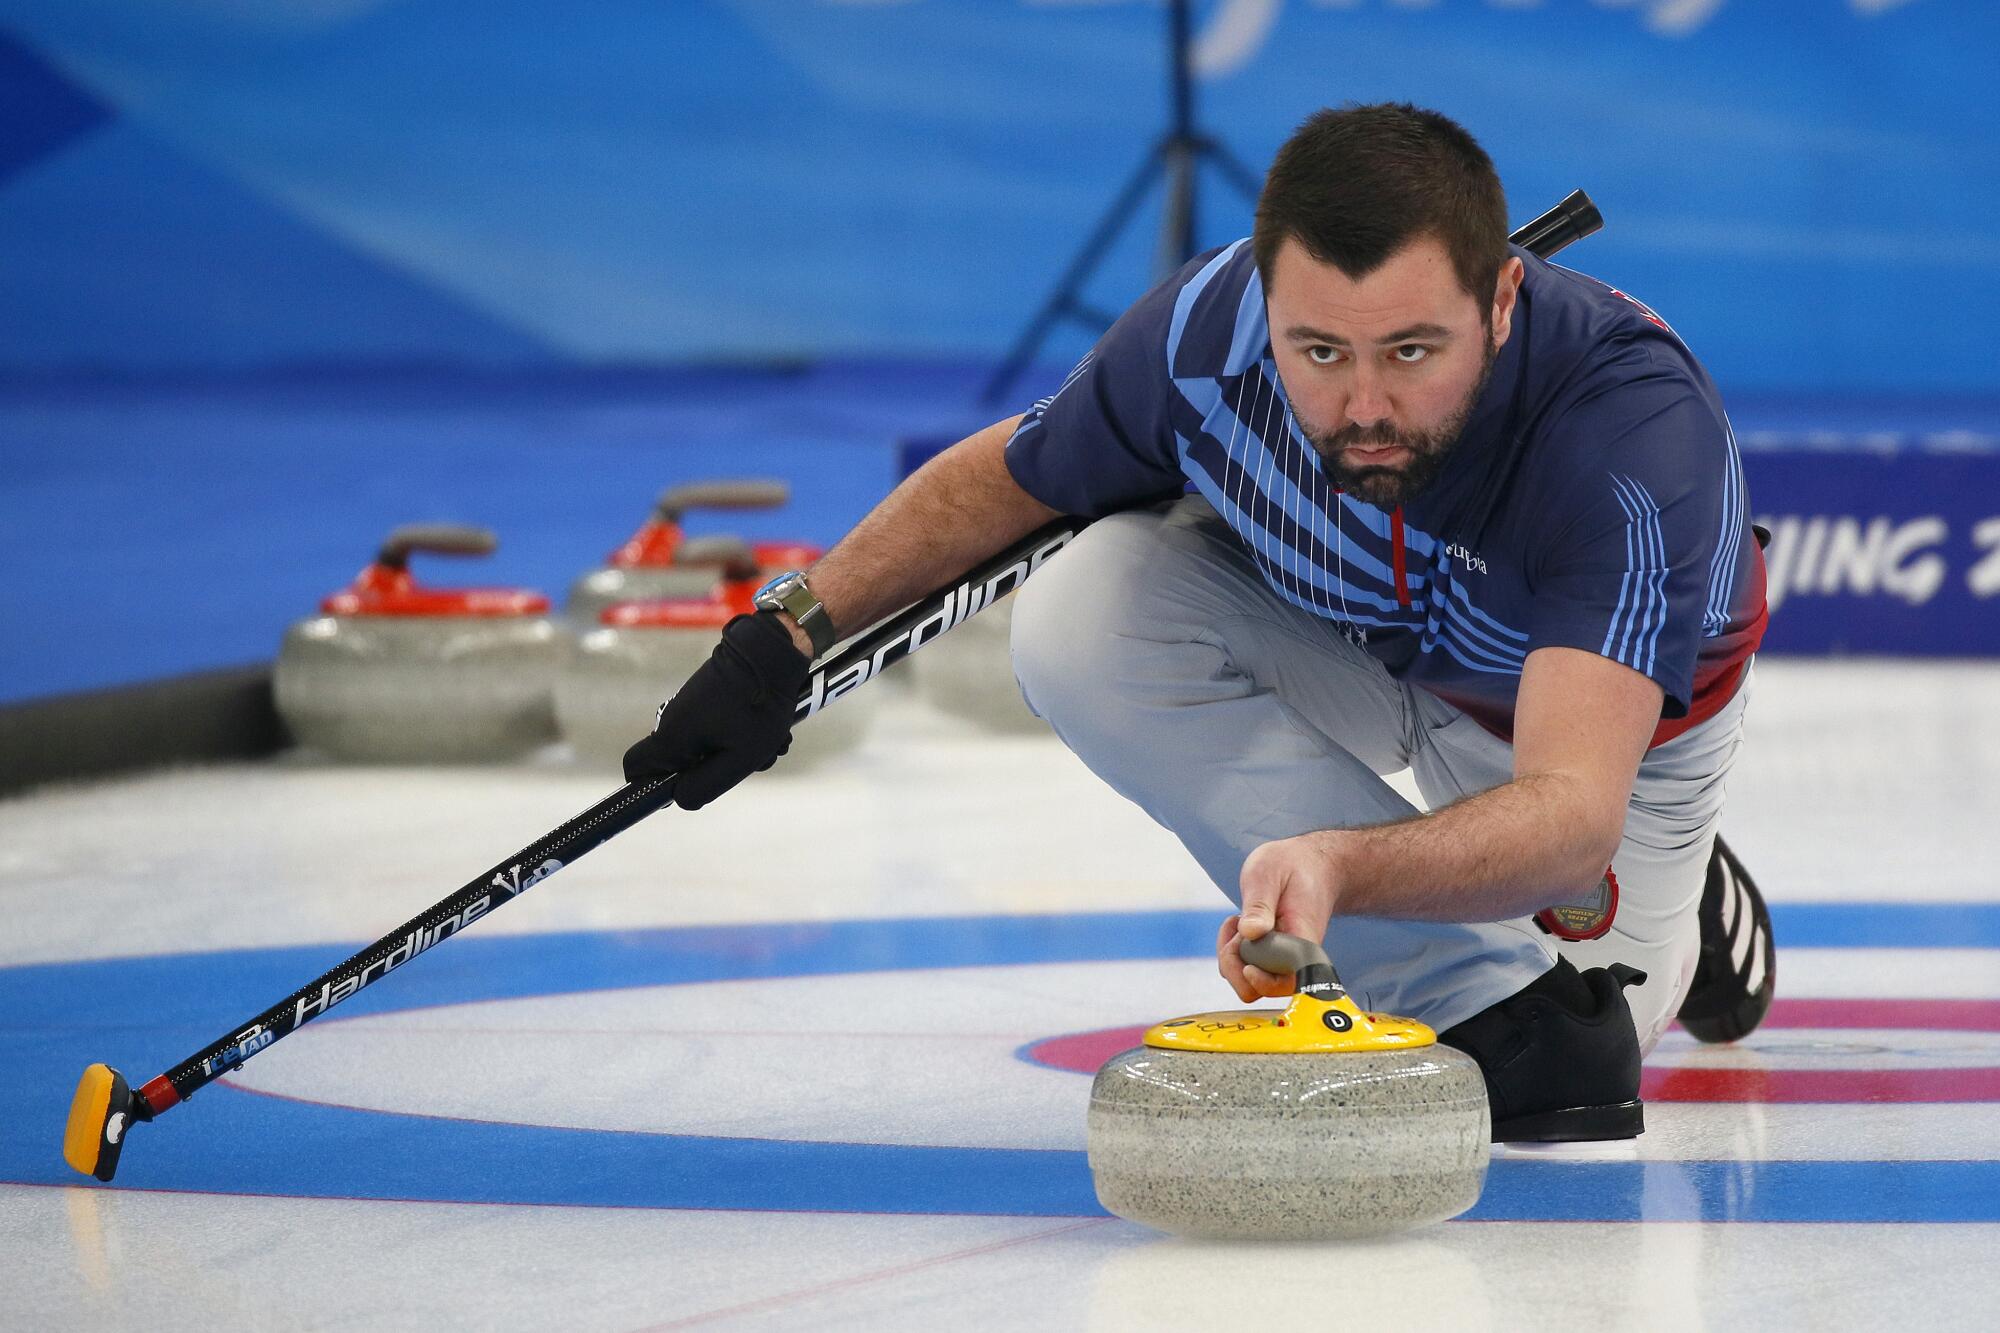 2022 Olympics Curling A Sport Centered On Strategy Precision Los Angeles Times